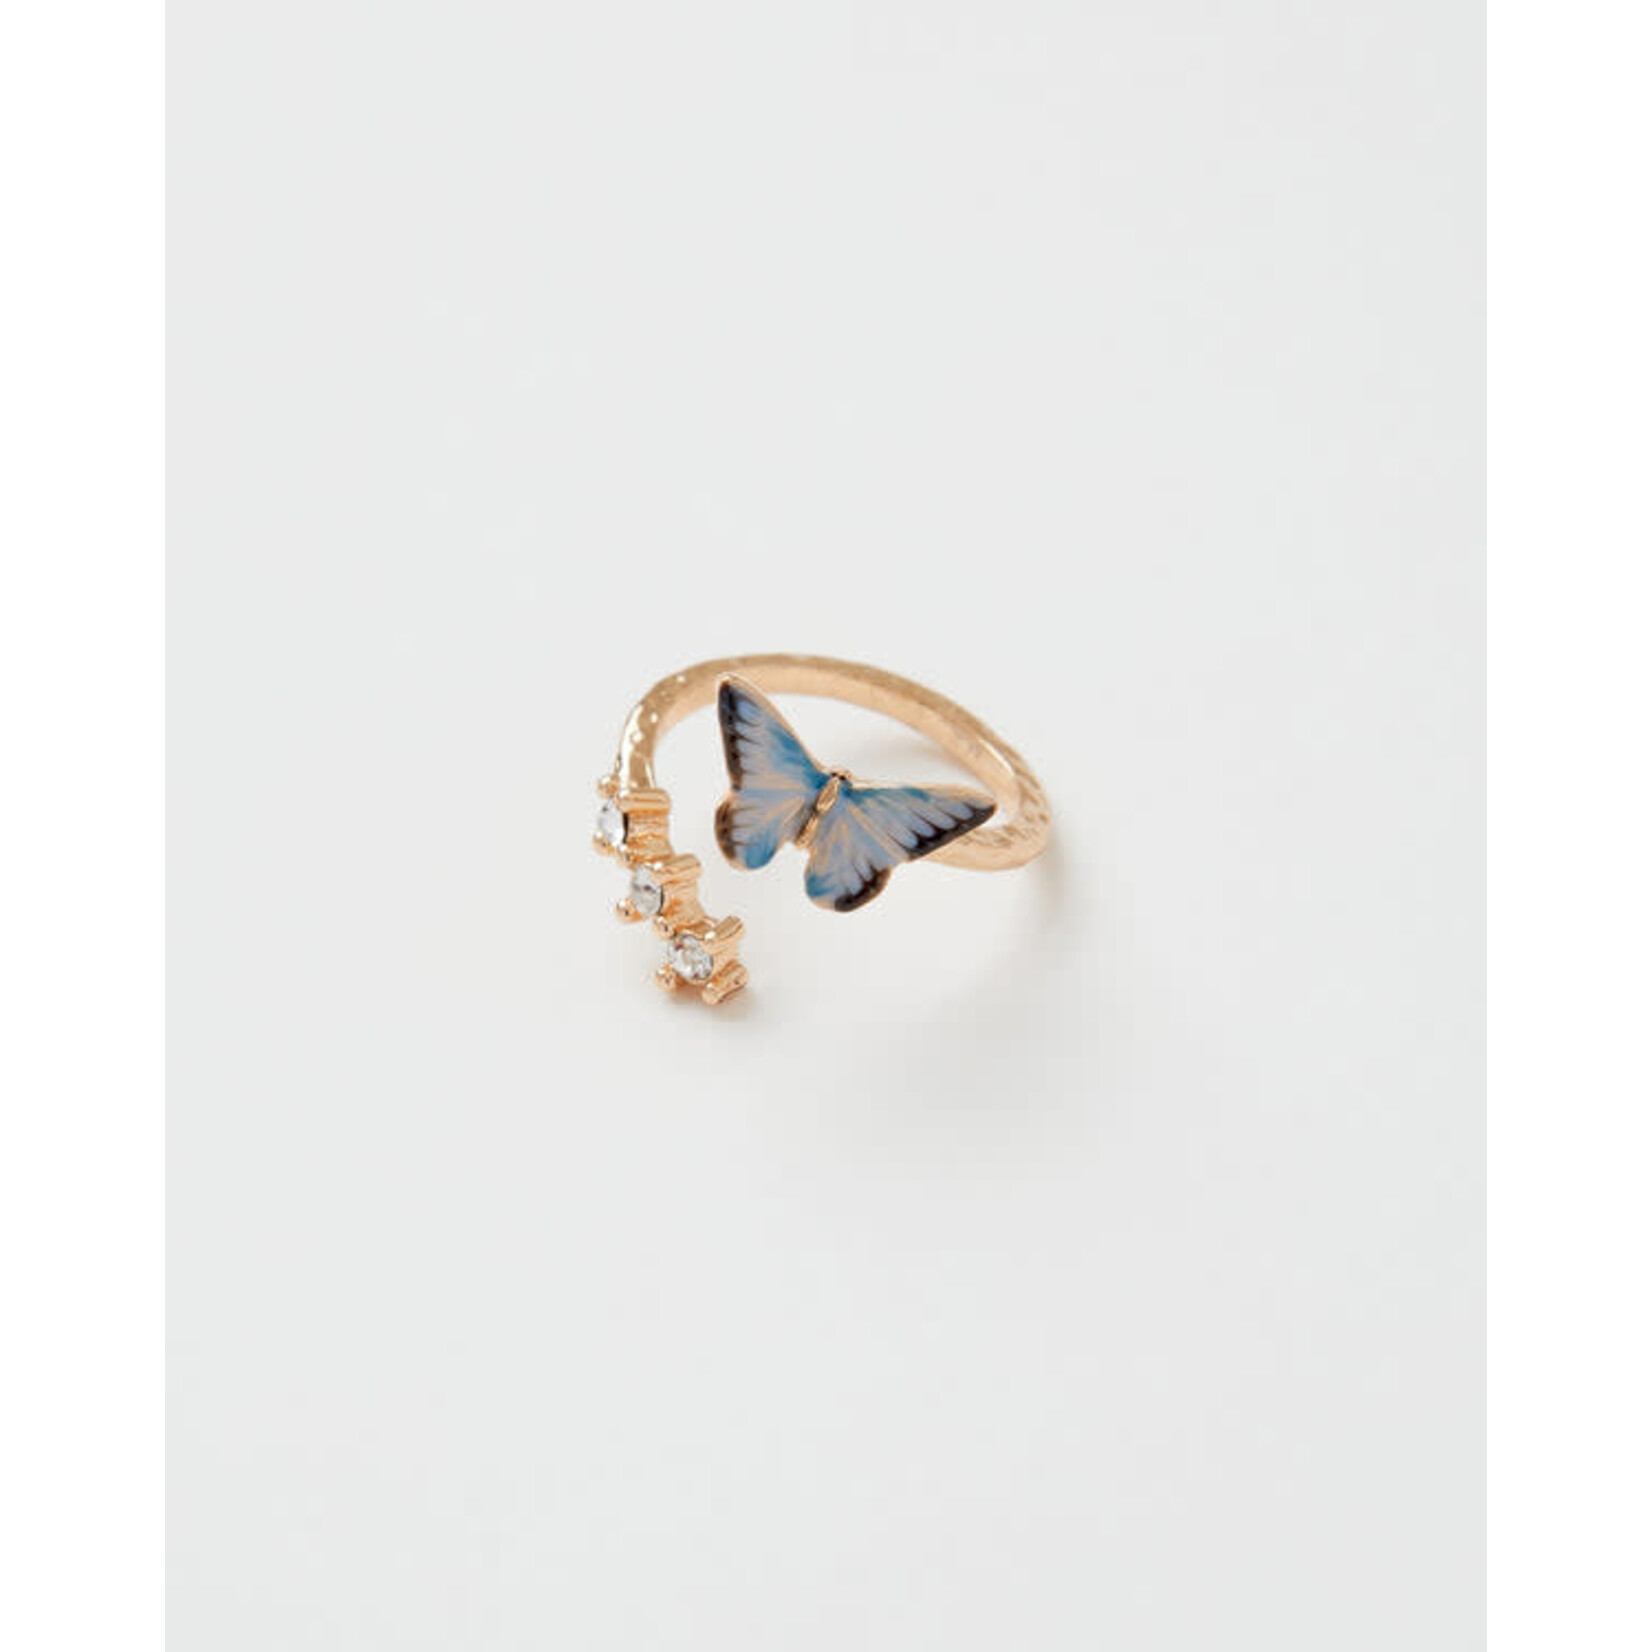 Fable England Enamel Blue Butterfly Ring